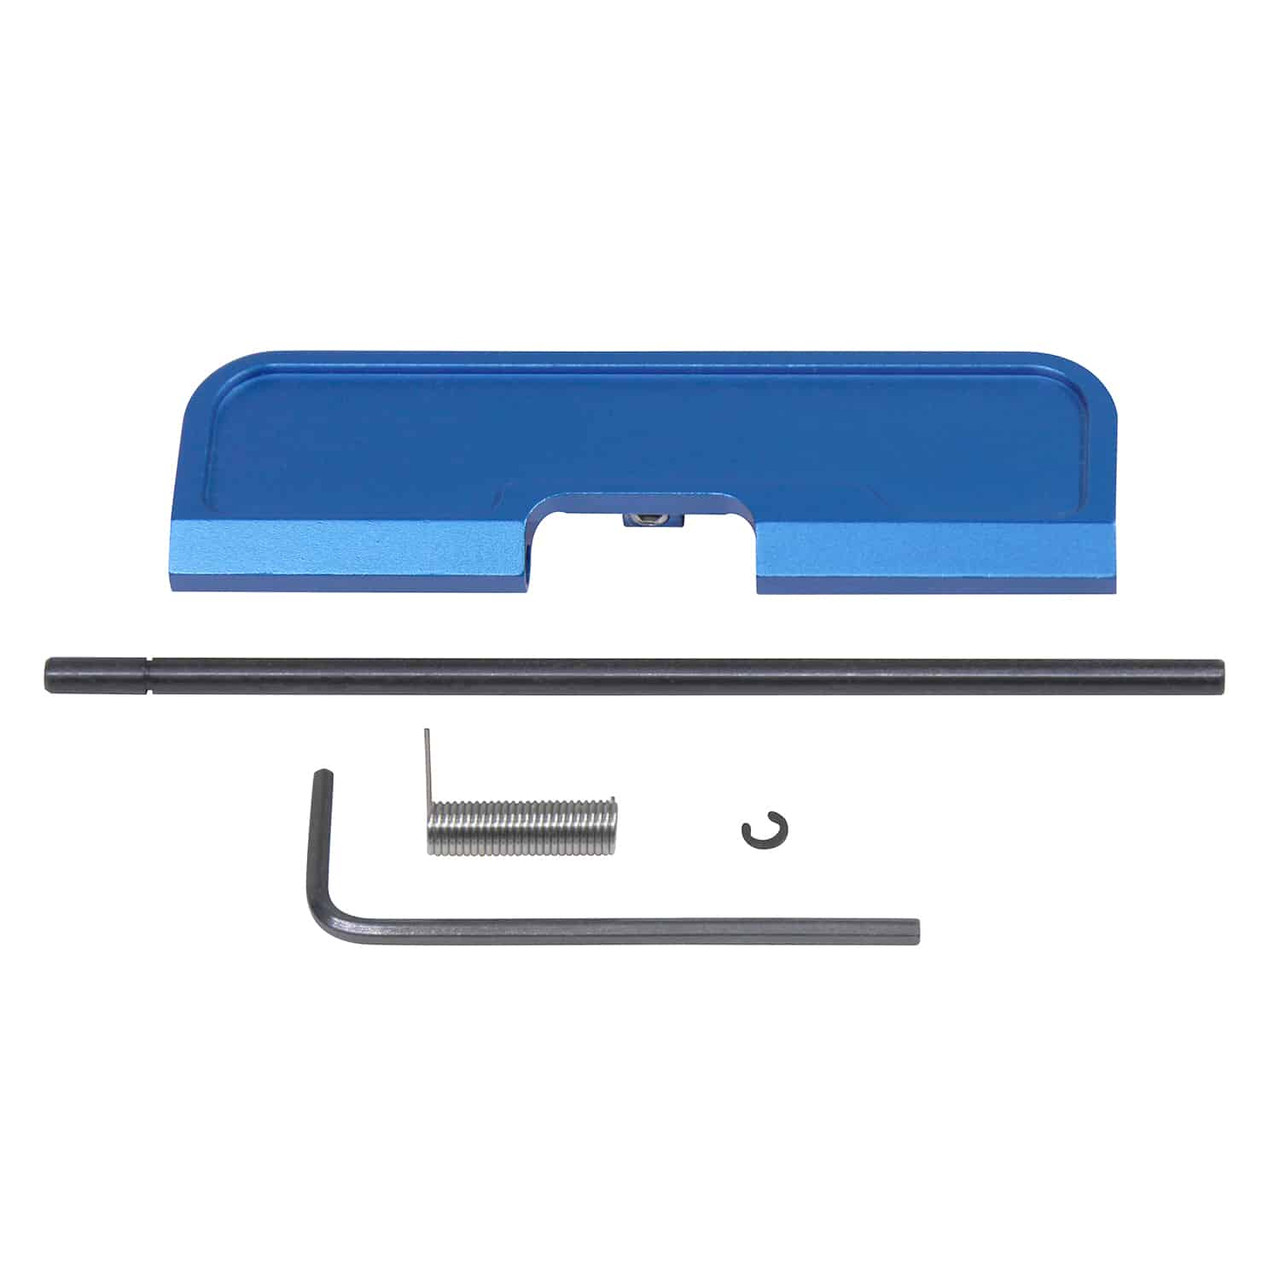 Guntec USA 223GATE-G3-BLUE Ejection Port Dust Cover Assembly (Gen 3) (Anodized Blue)